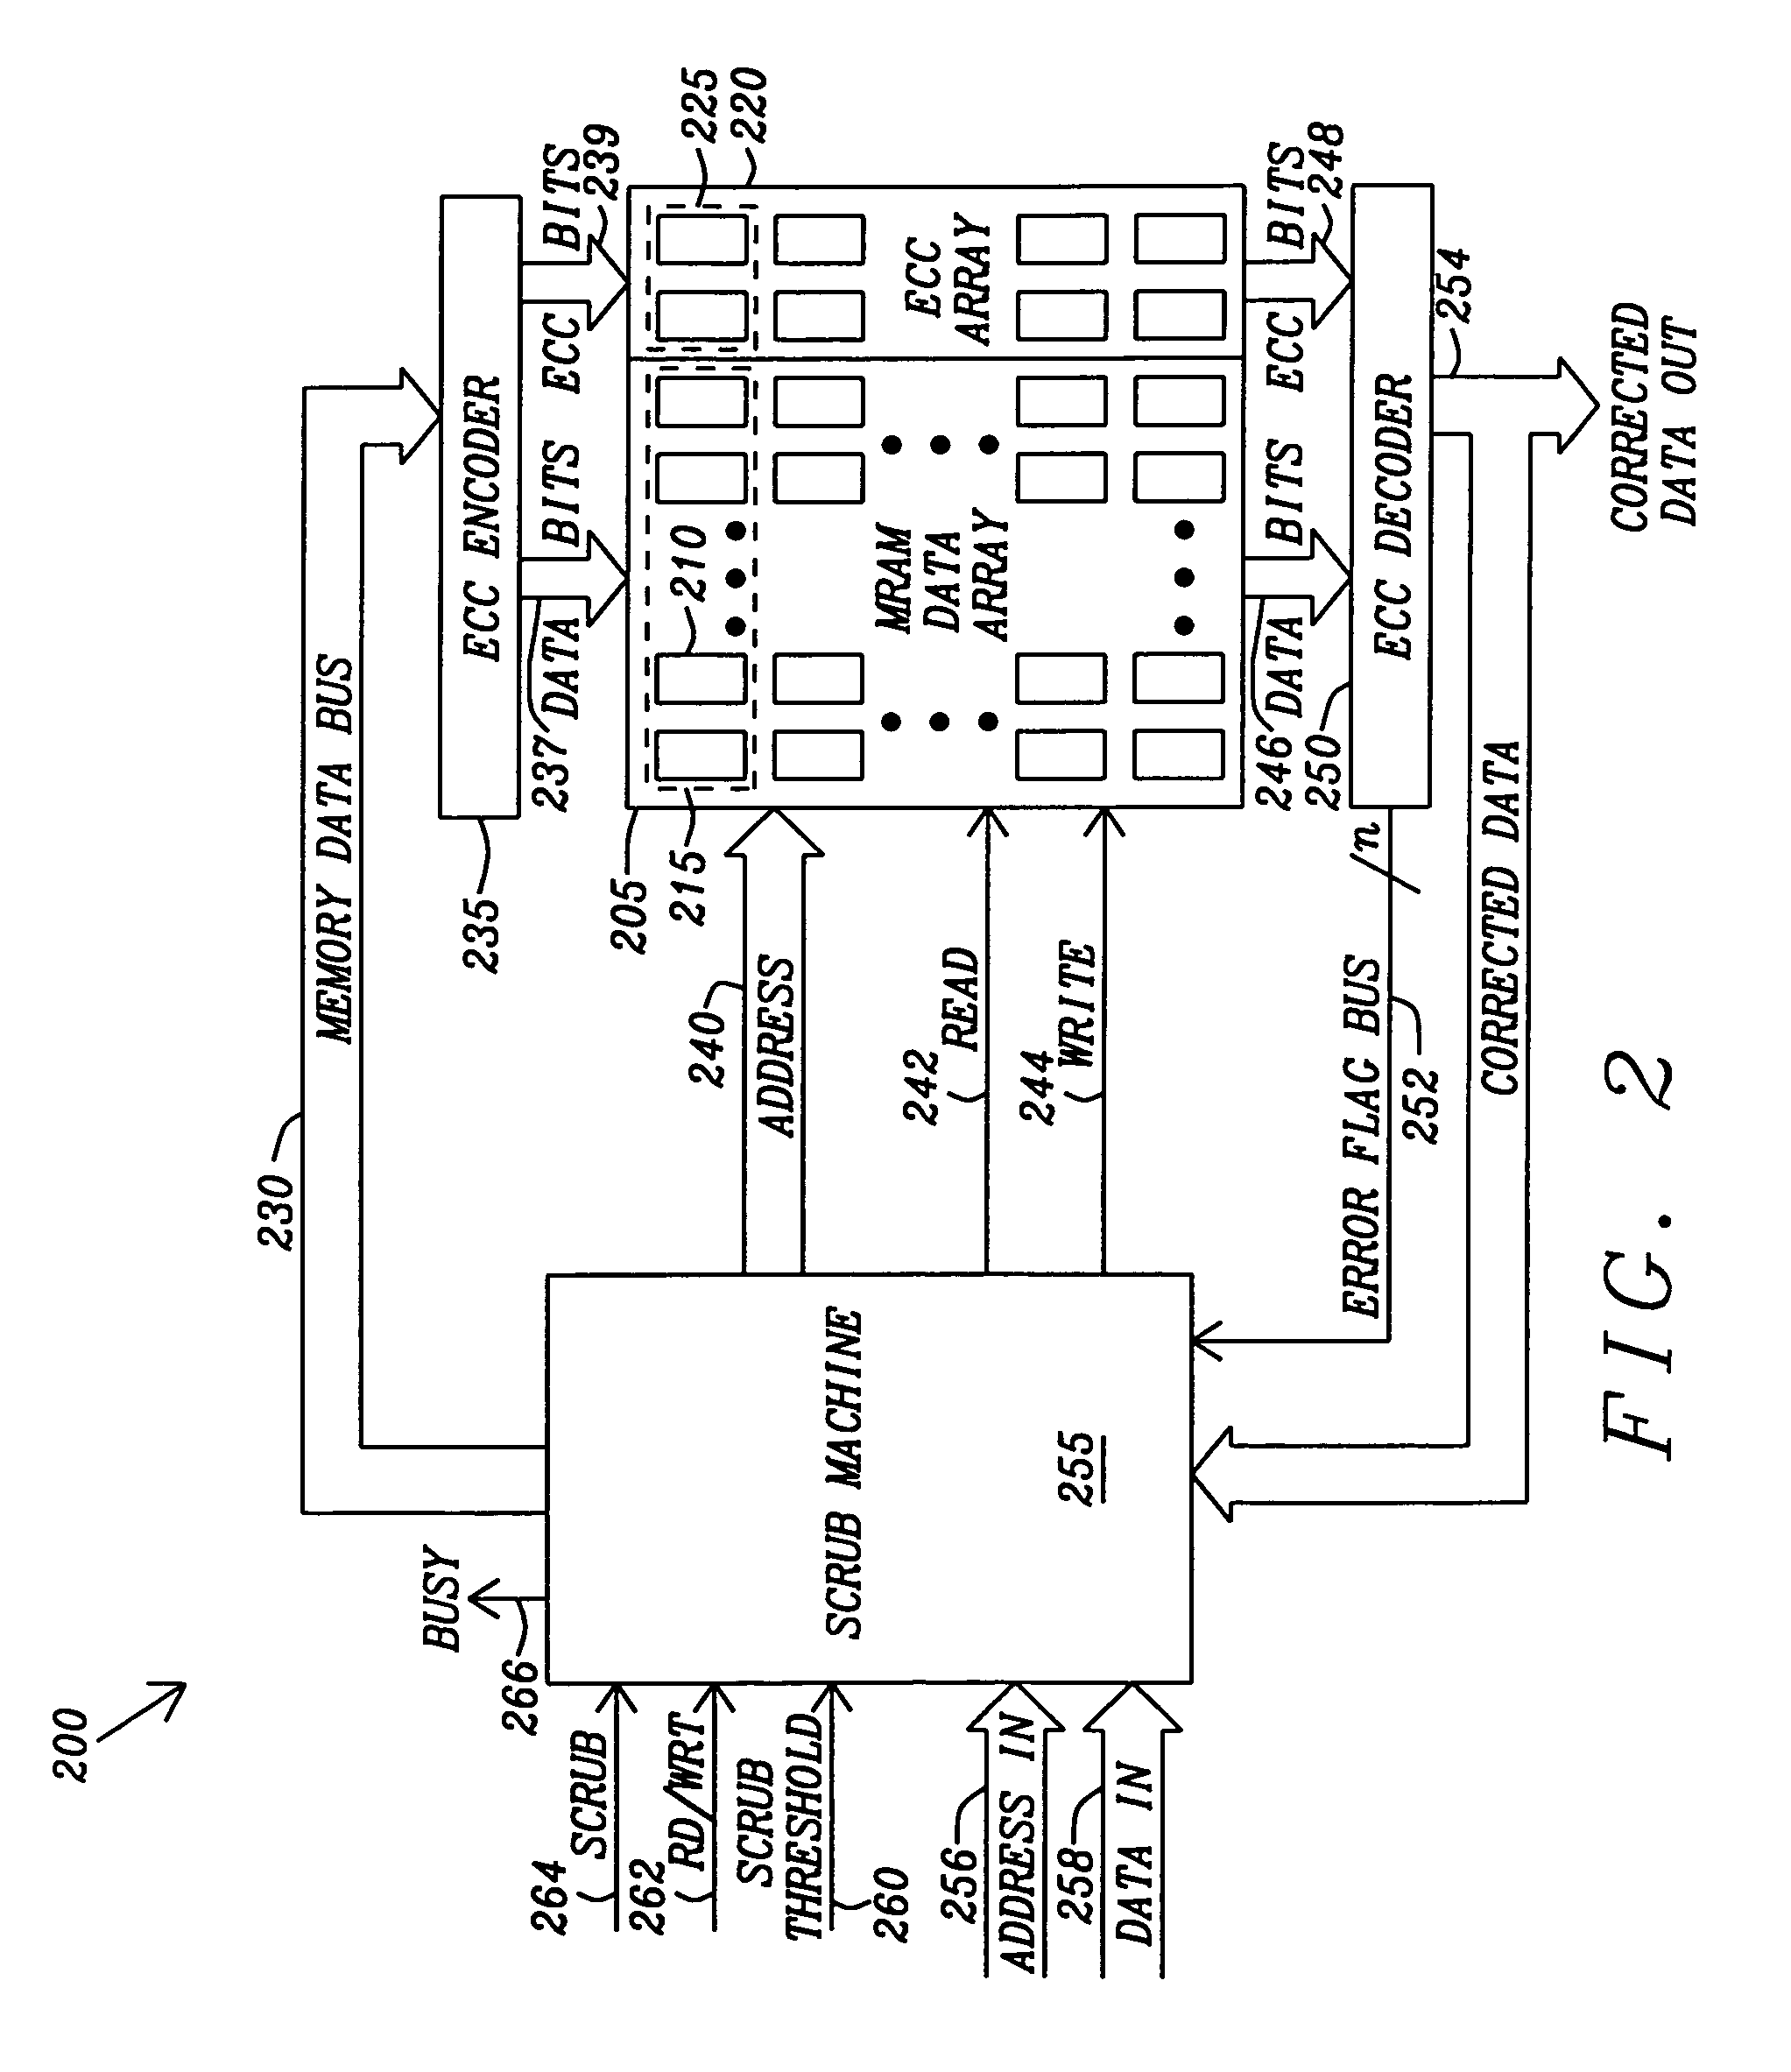 Method and apparatus for scrubbing accumulated disturb data errors in an array of SMT MRAM memory cells including rewriting reference bits